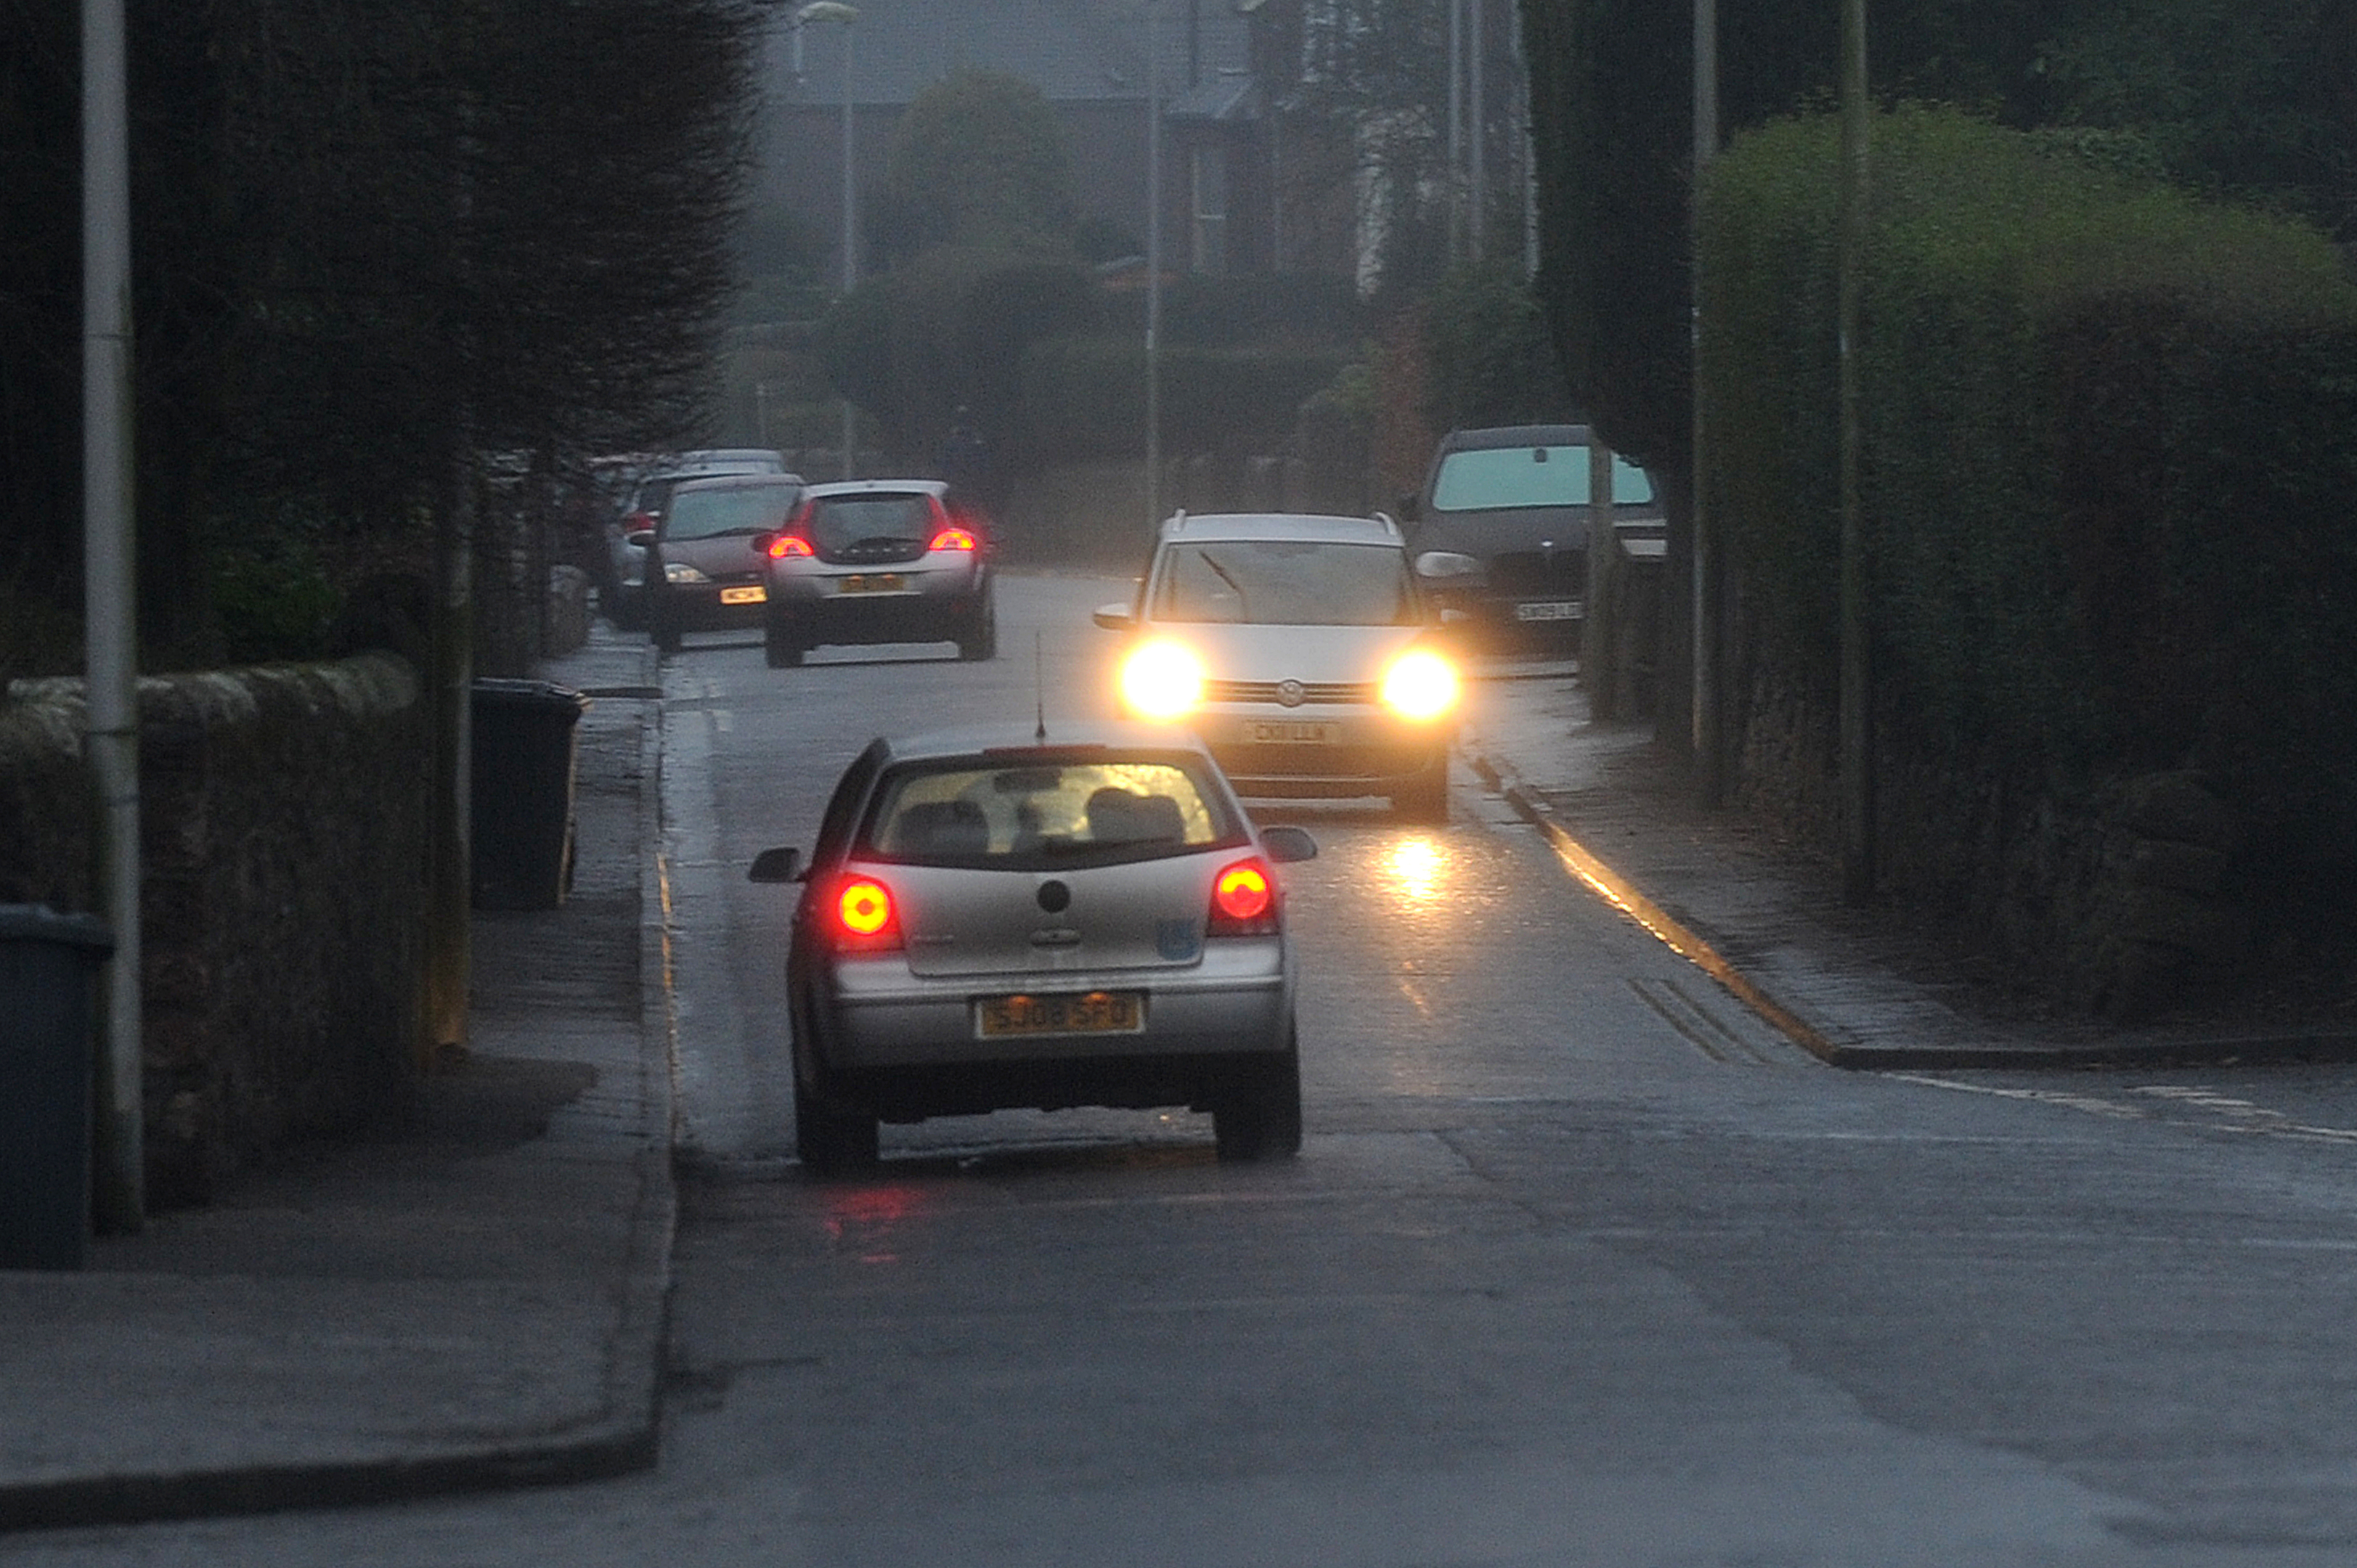 Pavement parking in Kirriemuir is bad for pedestrians as well as traffic, according to one councillor.